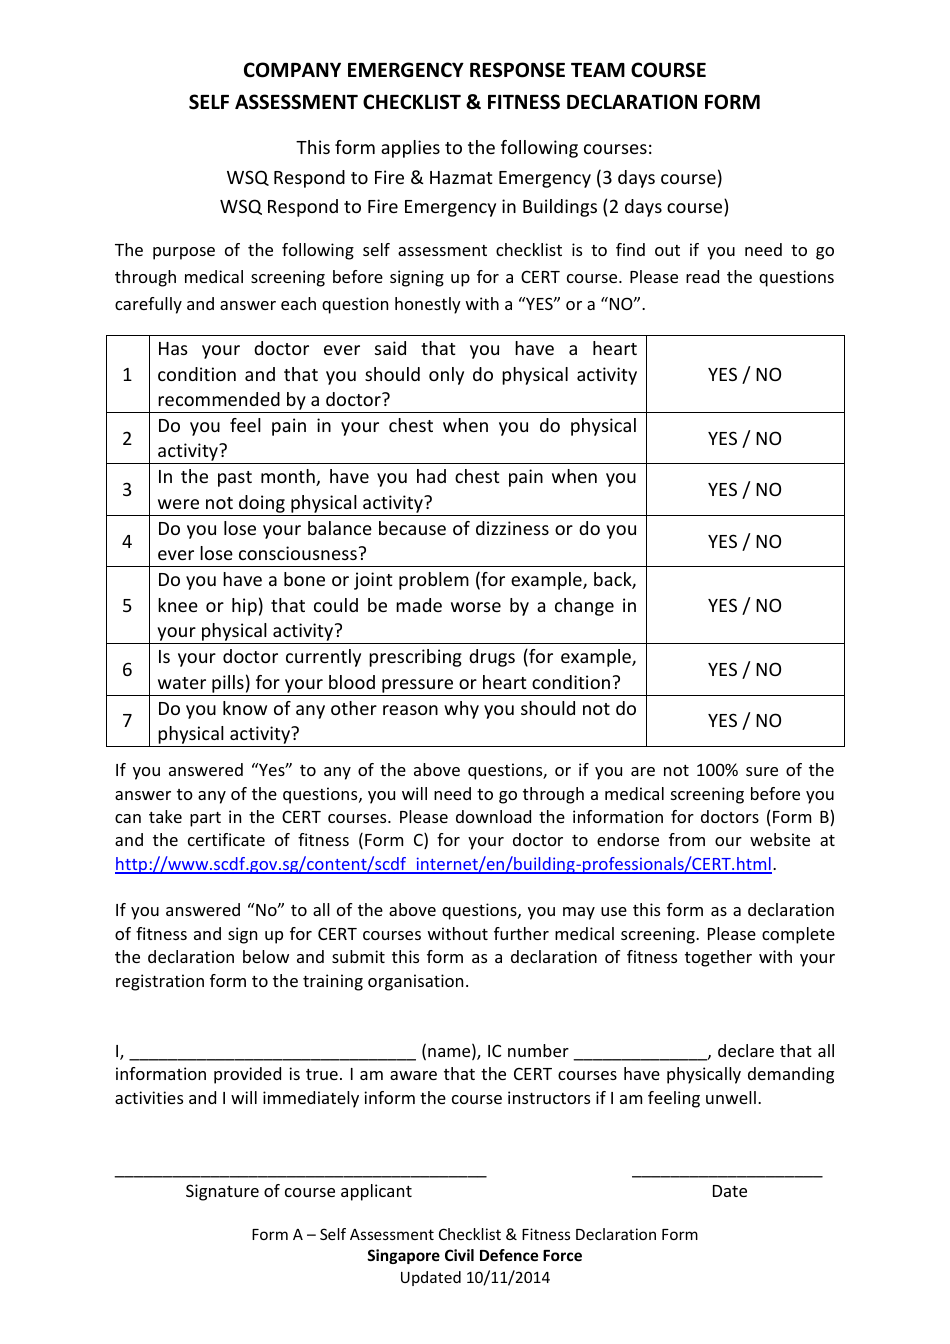 Form A Self Assessment Checklist  Fitness Declaration Form - Singapore, Page 1